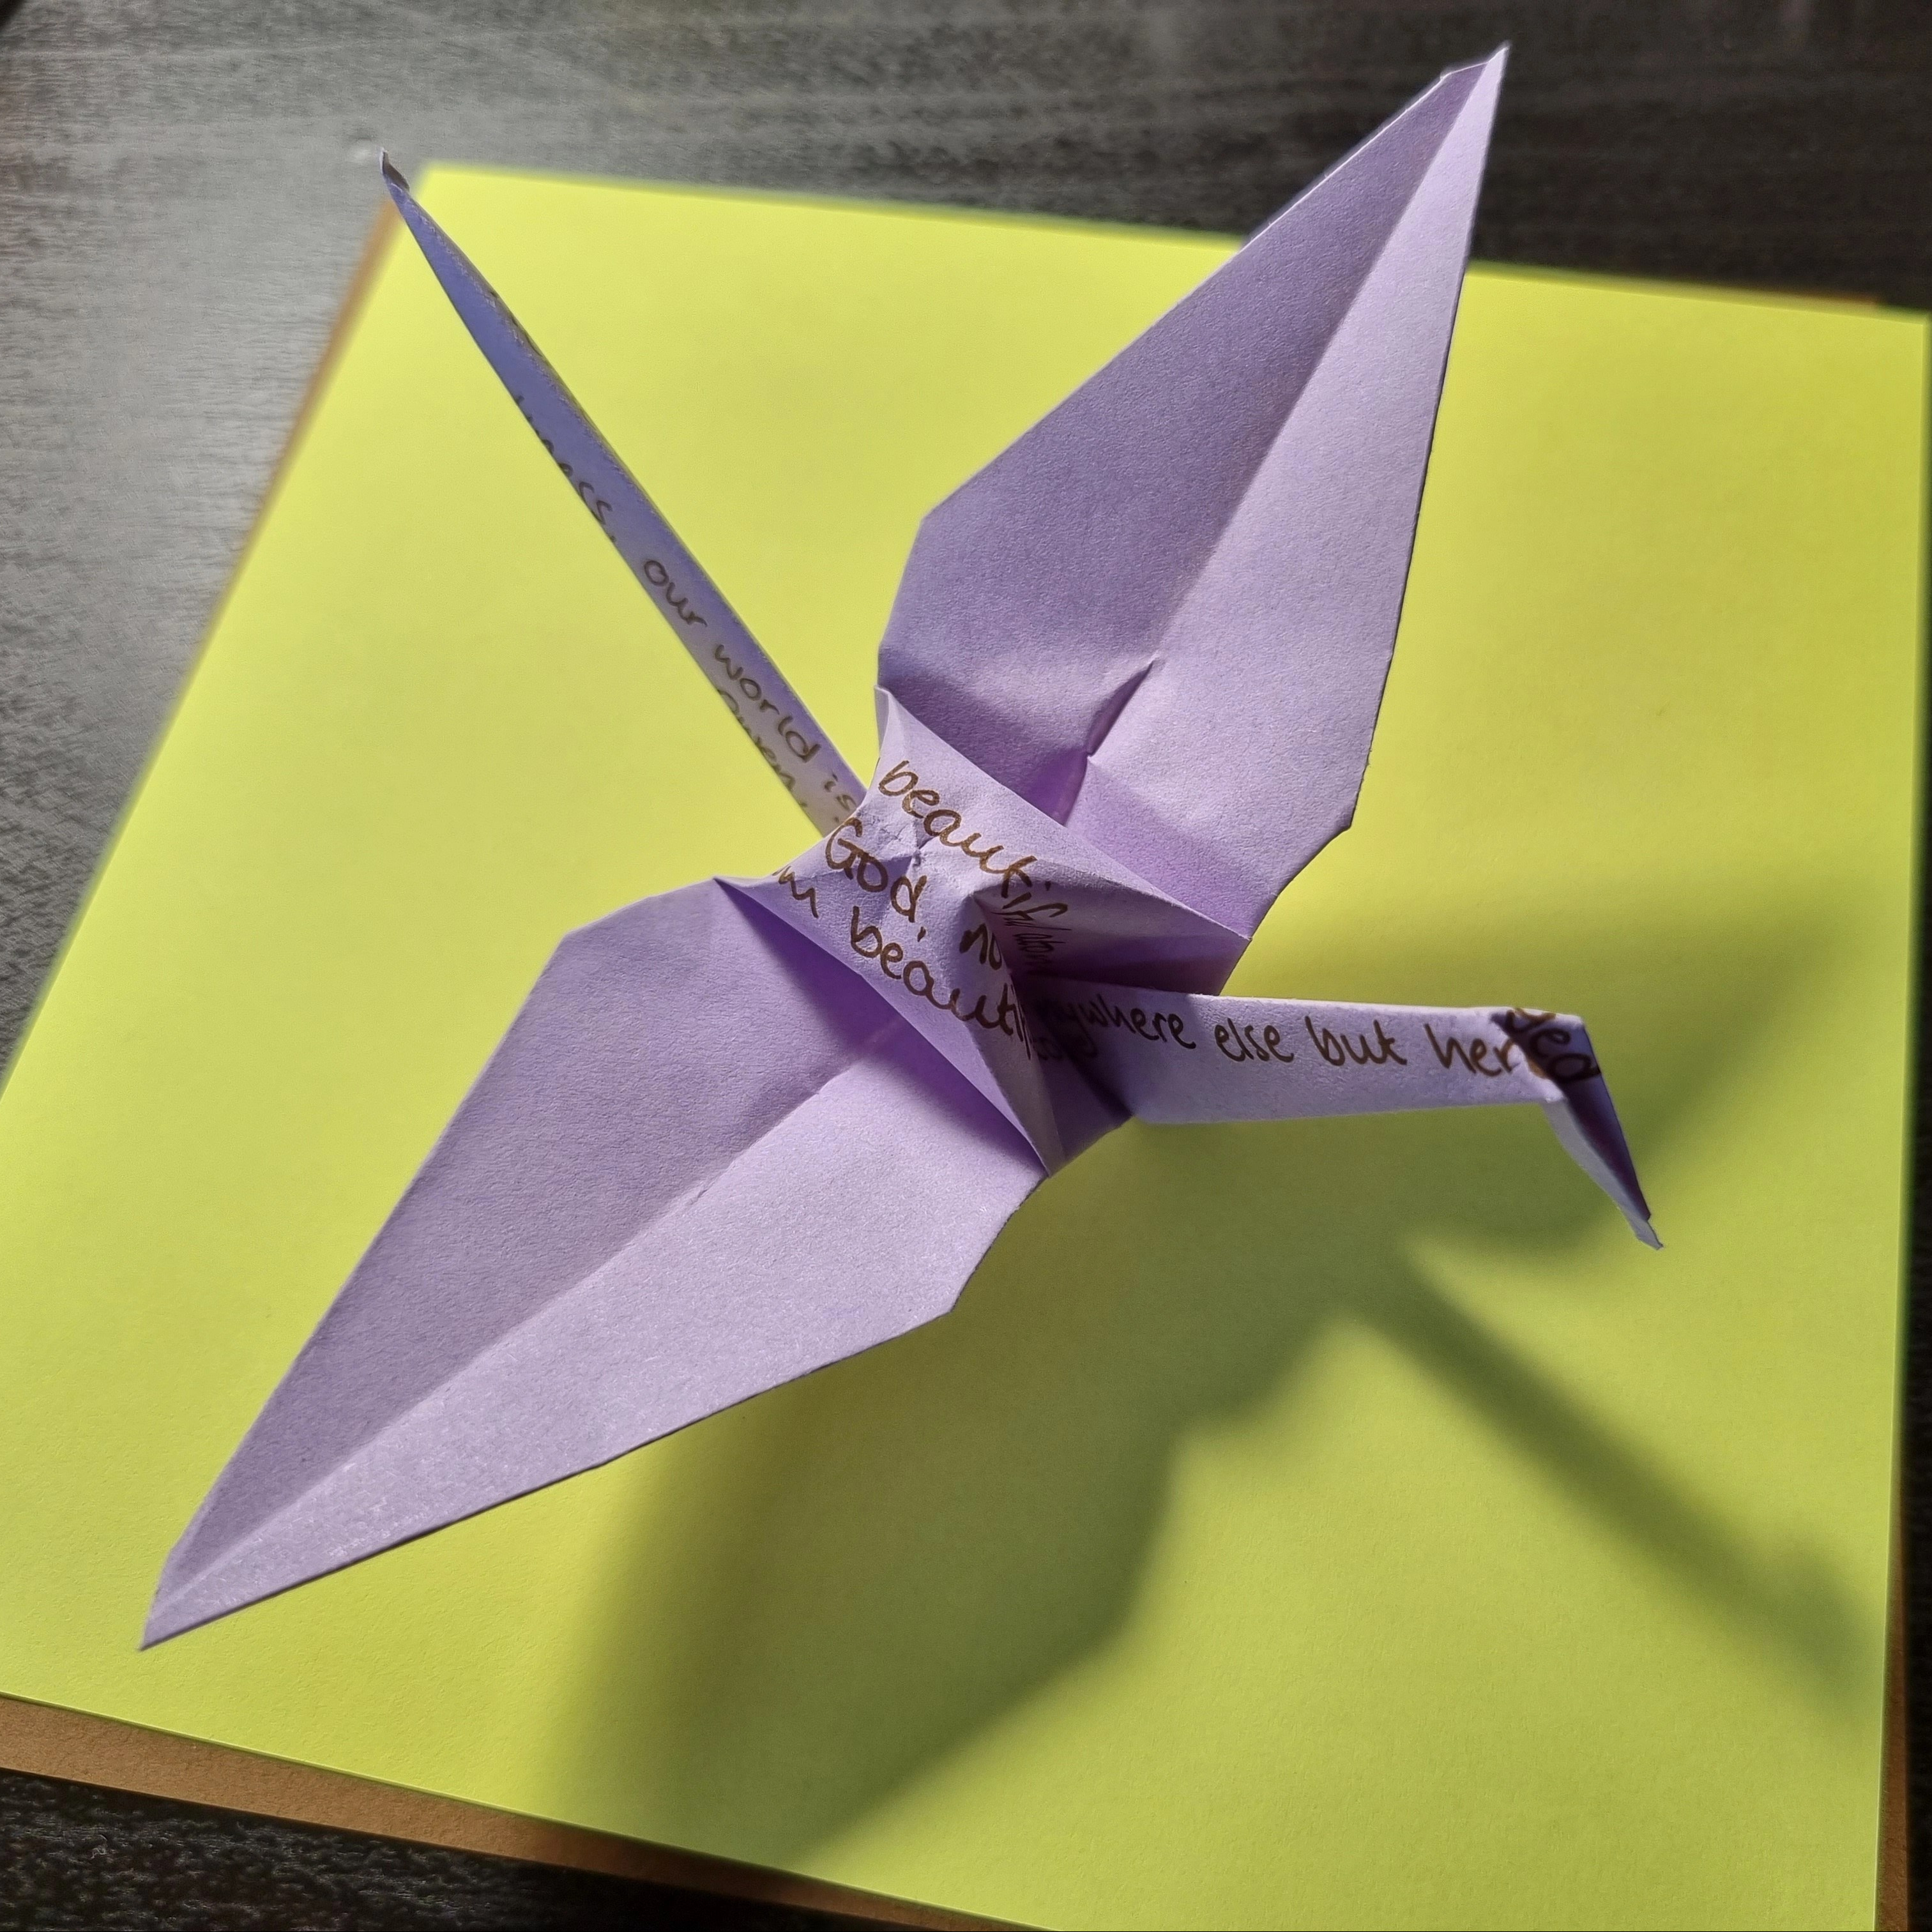 Lilac paper origami crane with fragments of a poem in brown pen, placed on yellow square paper on black table.